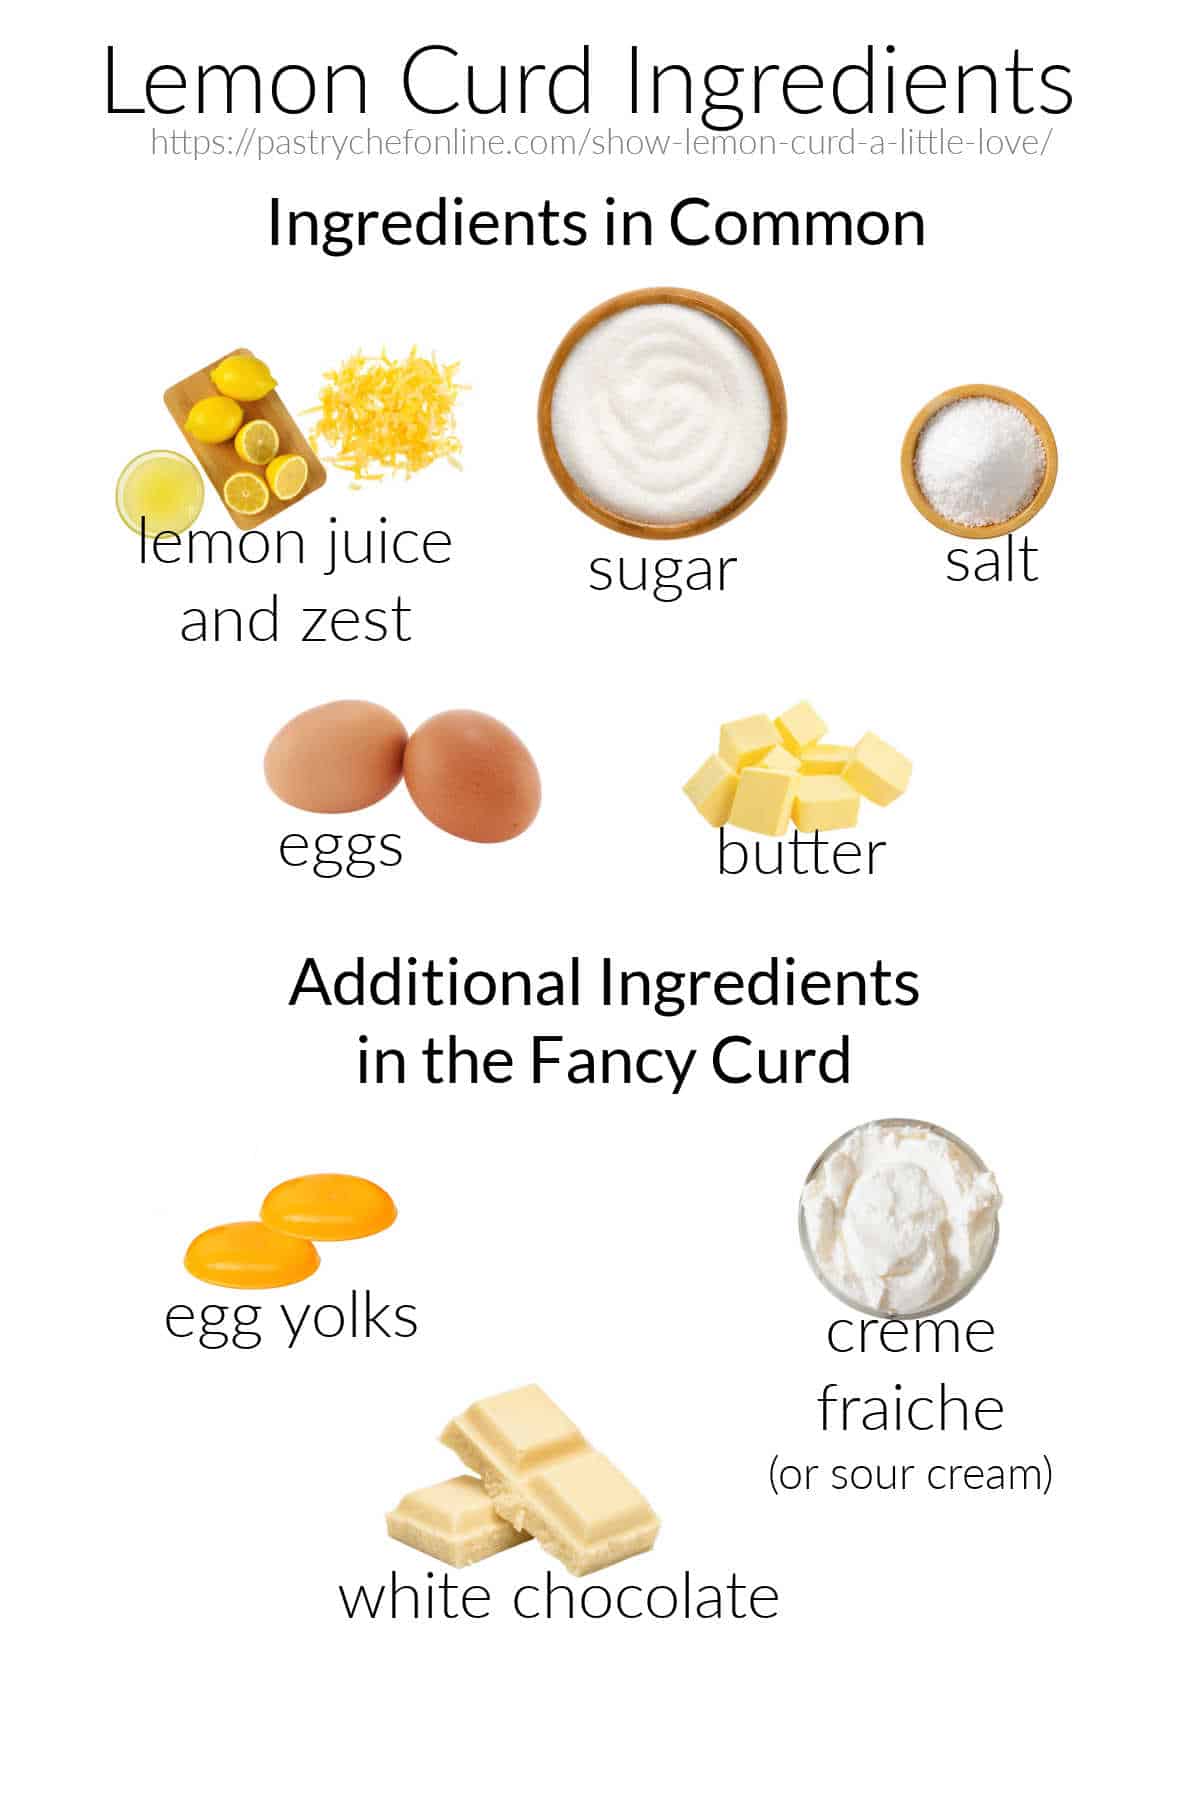 Images of all the ingredients needed to make two types of lemon curd, labeled and on a white background.